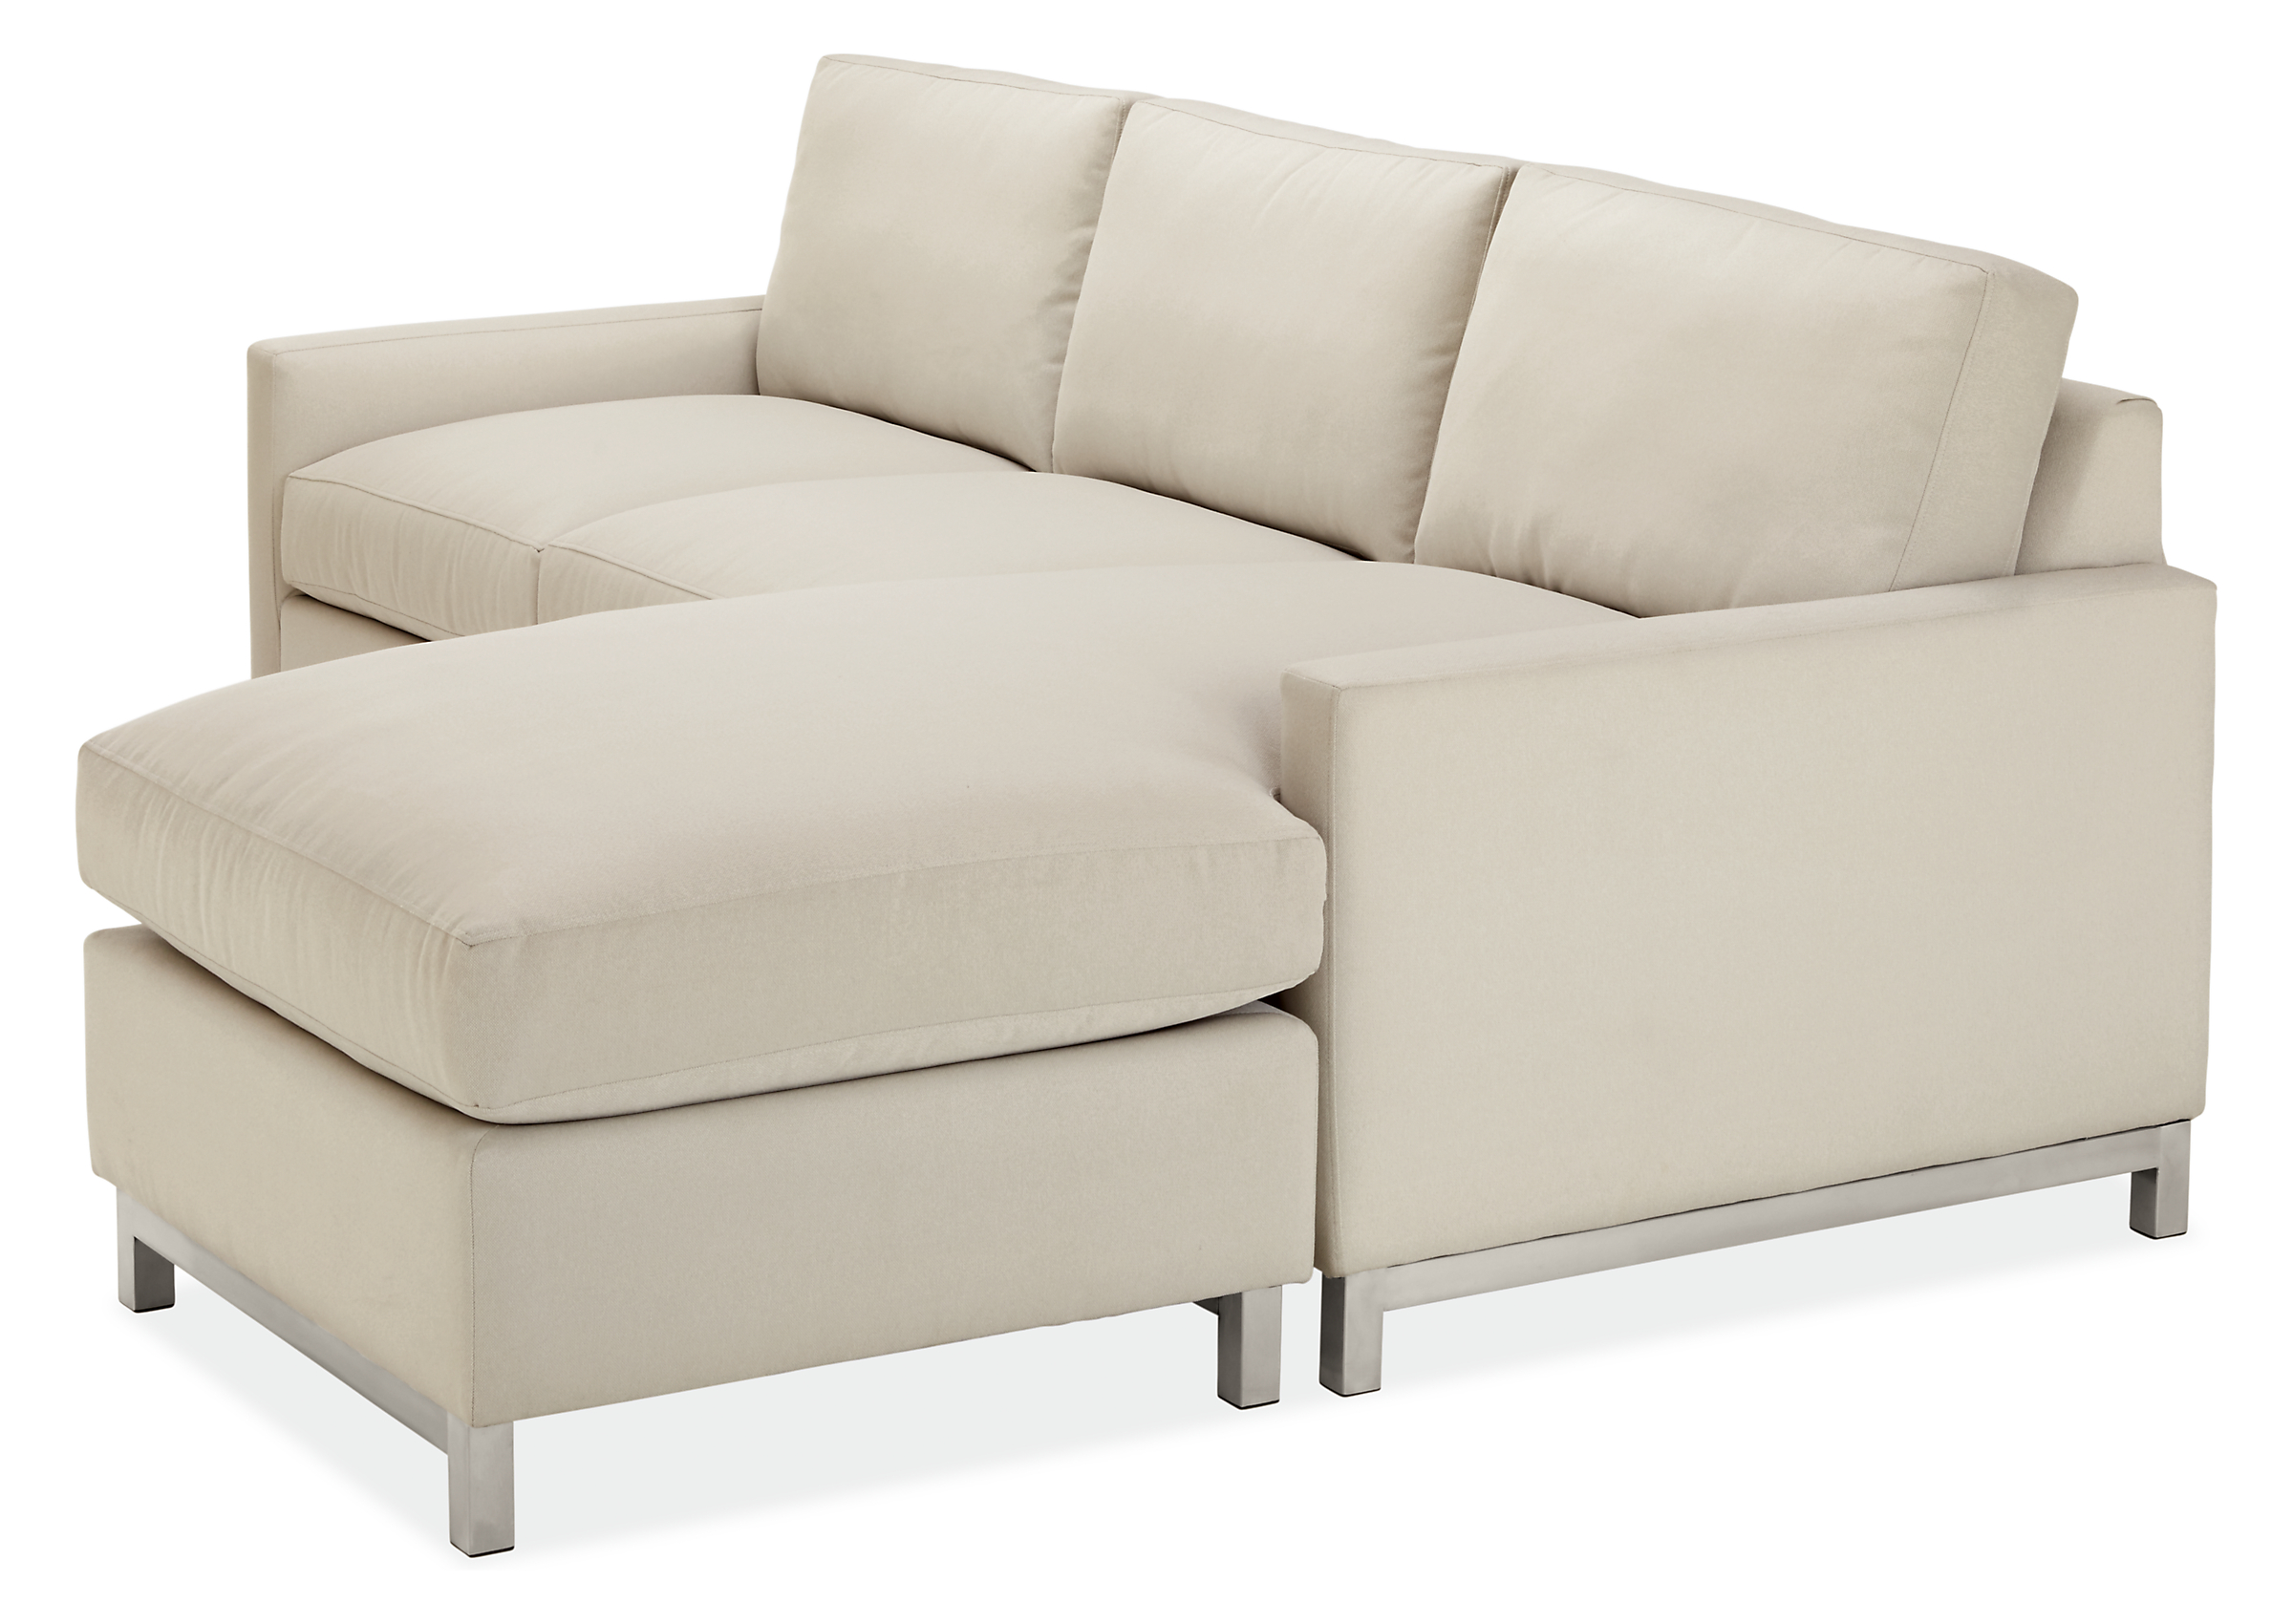 Detail of Stevens 91" Sofa with Reversible Chaise in Dawson Fabric.